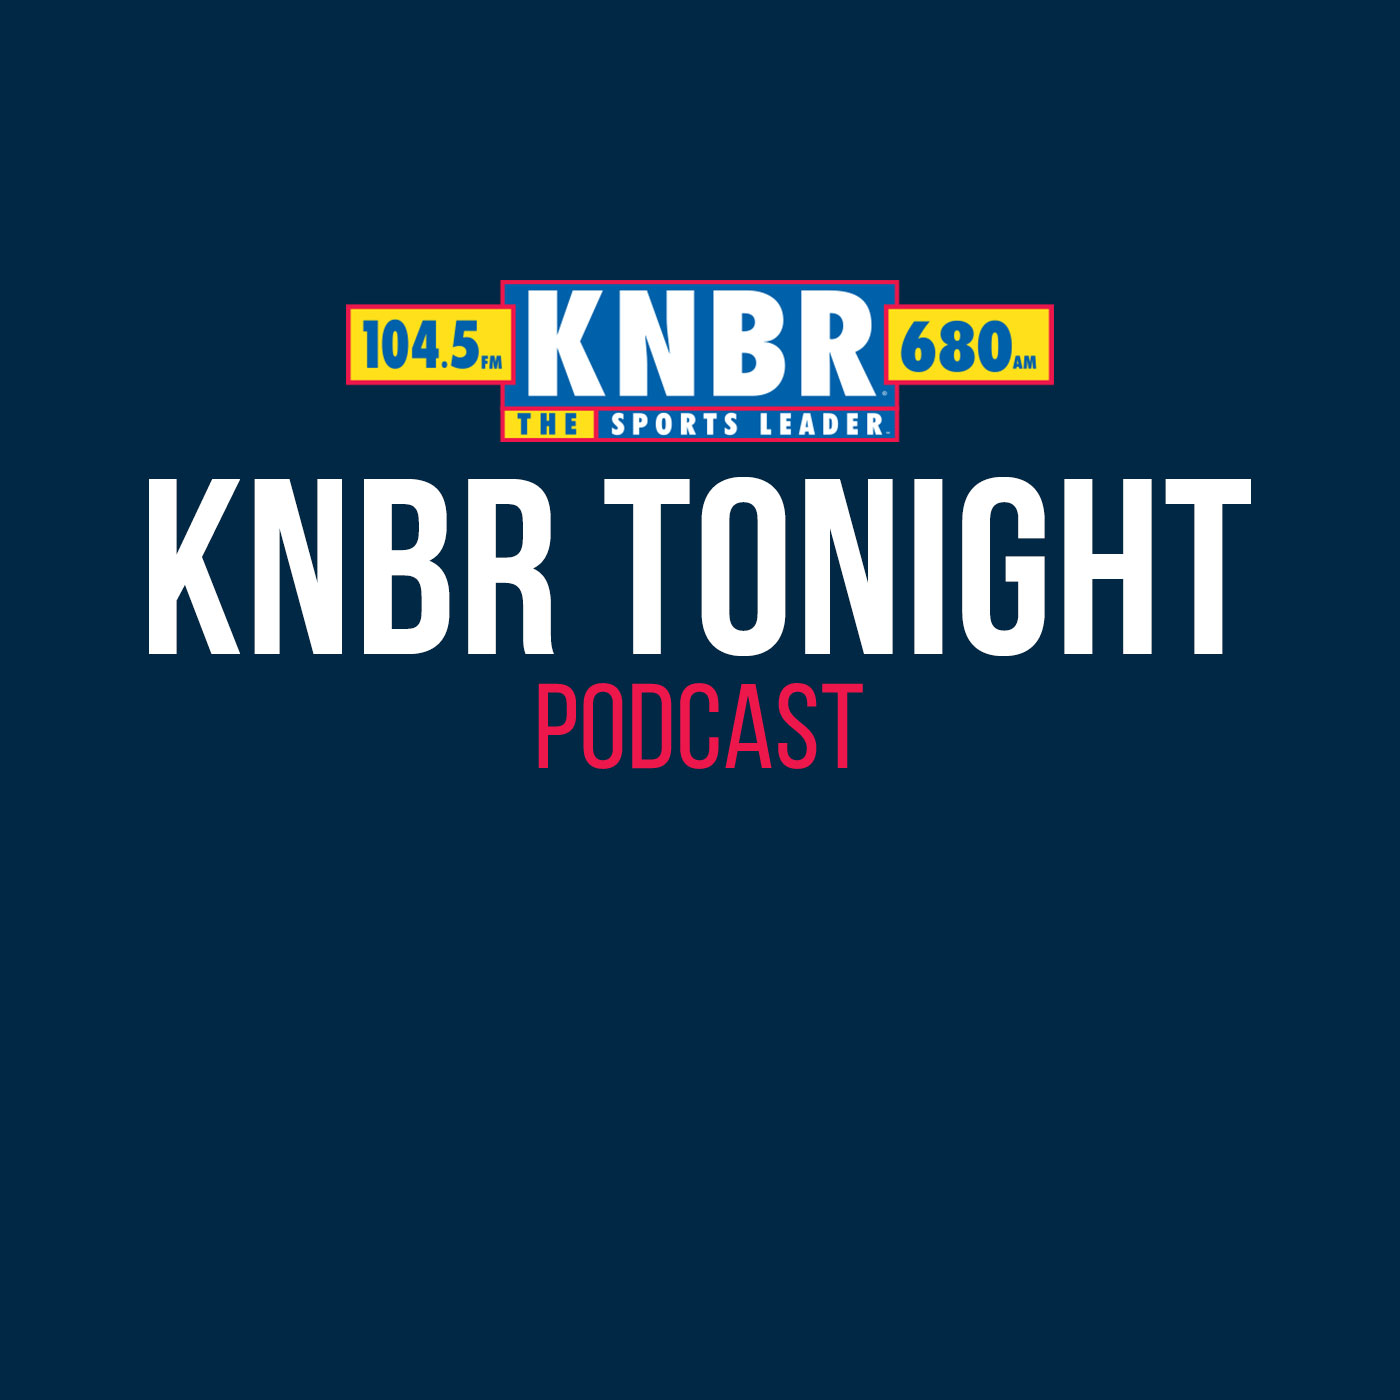 1-21 Mike Wahle joins KNBR Tonight with Kerry Crowley to talk about the weather being a factor in tomorrow's 49ers/Packers matchup